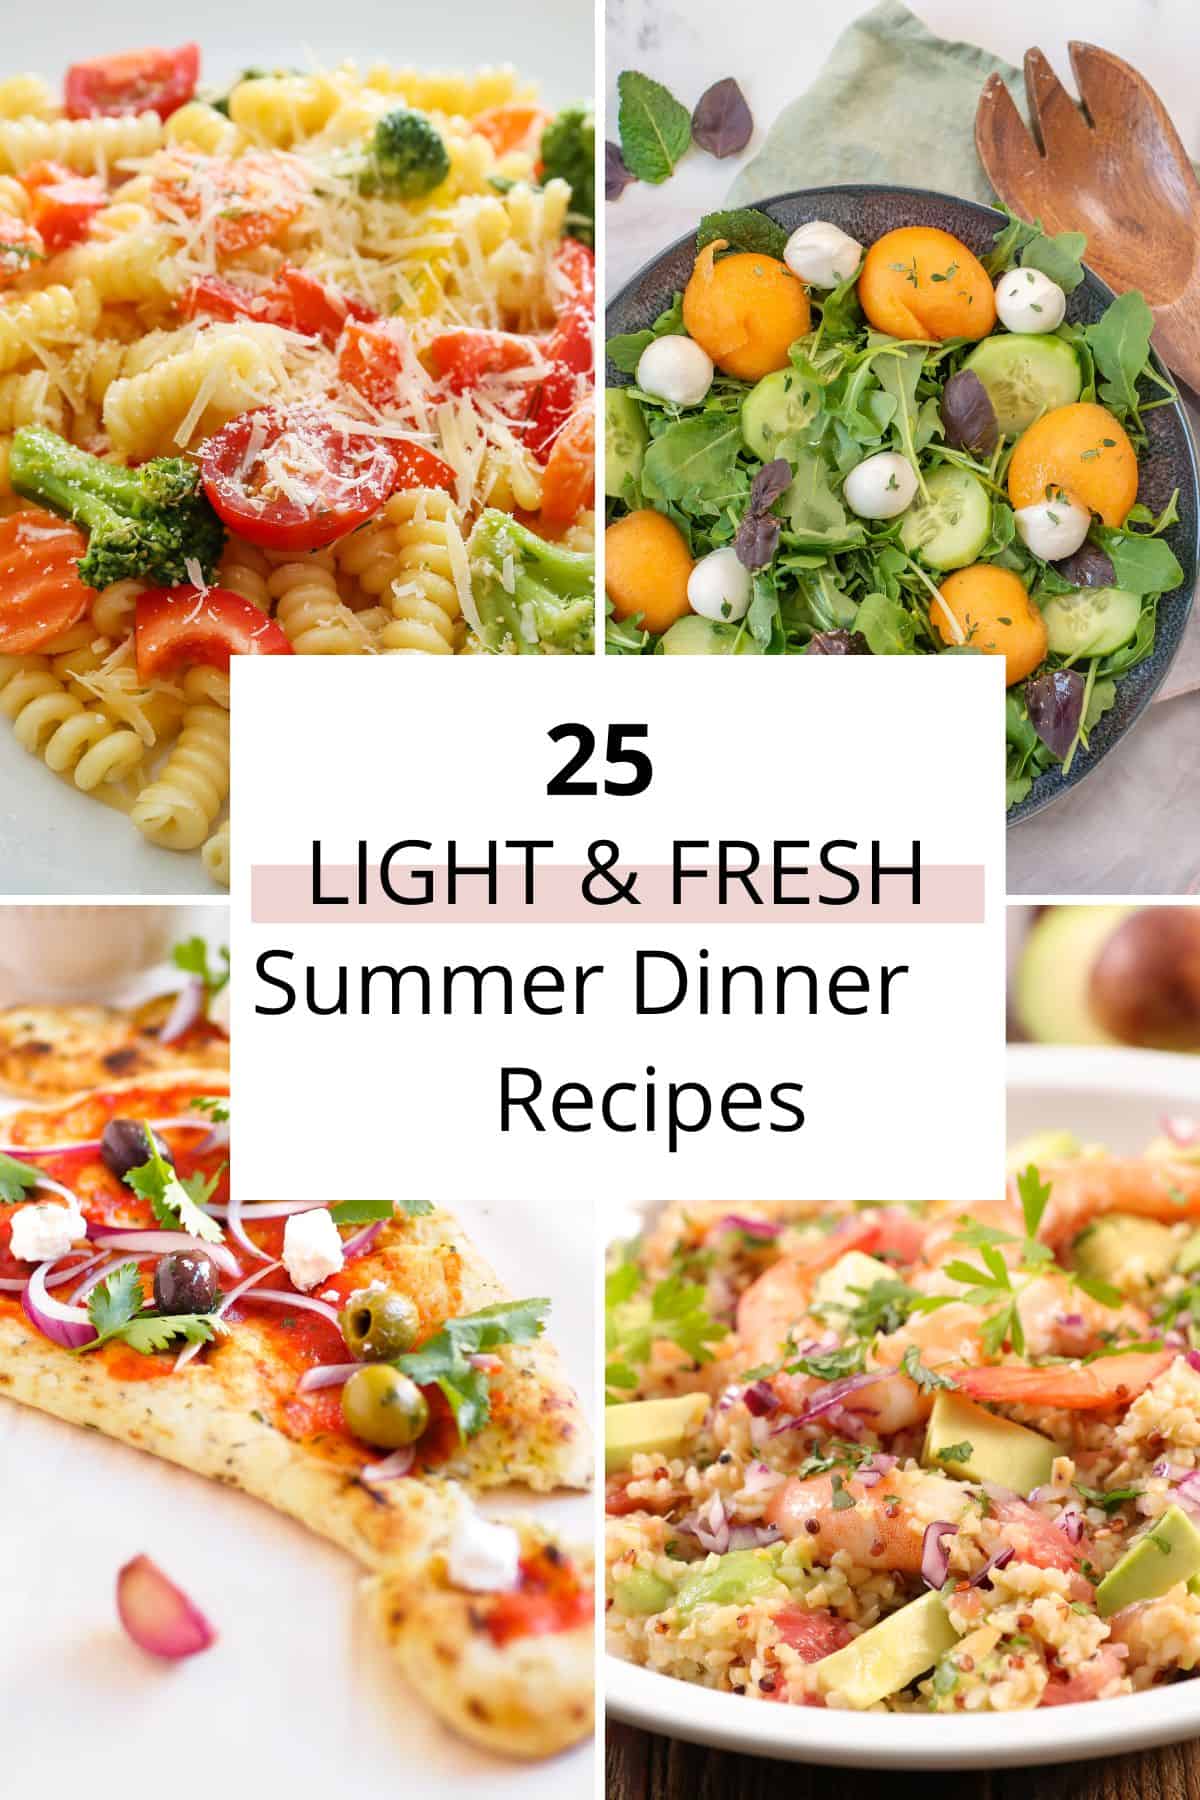 A delicious dinner collage of different summer recipes.